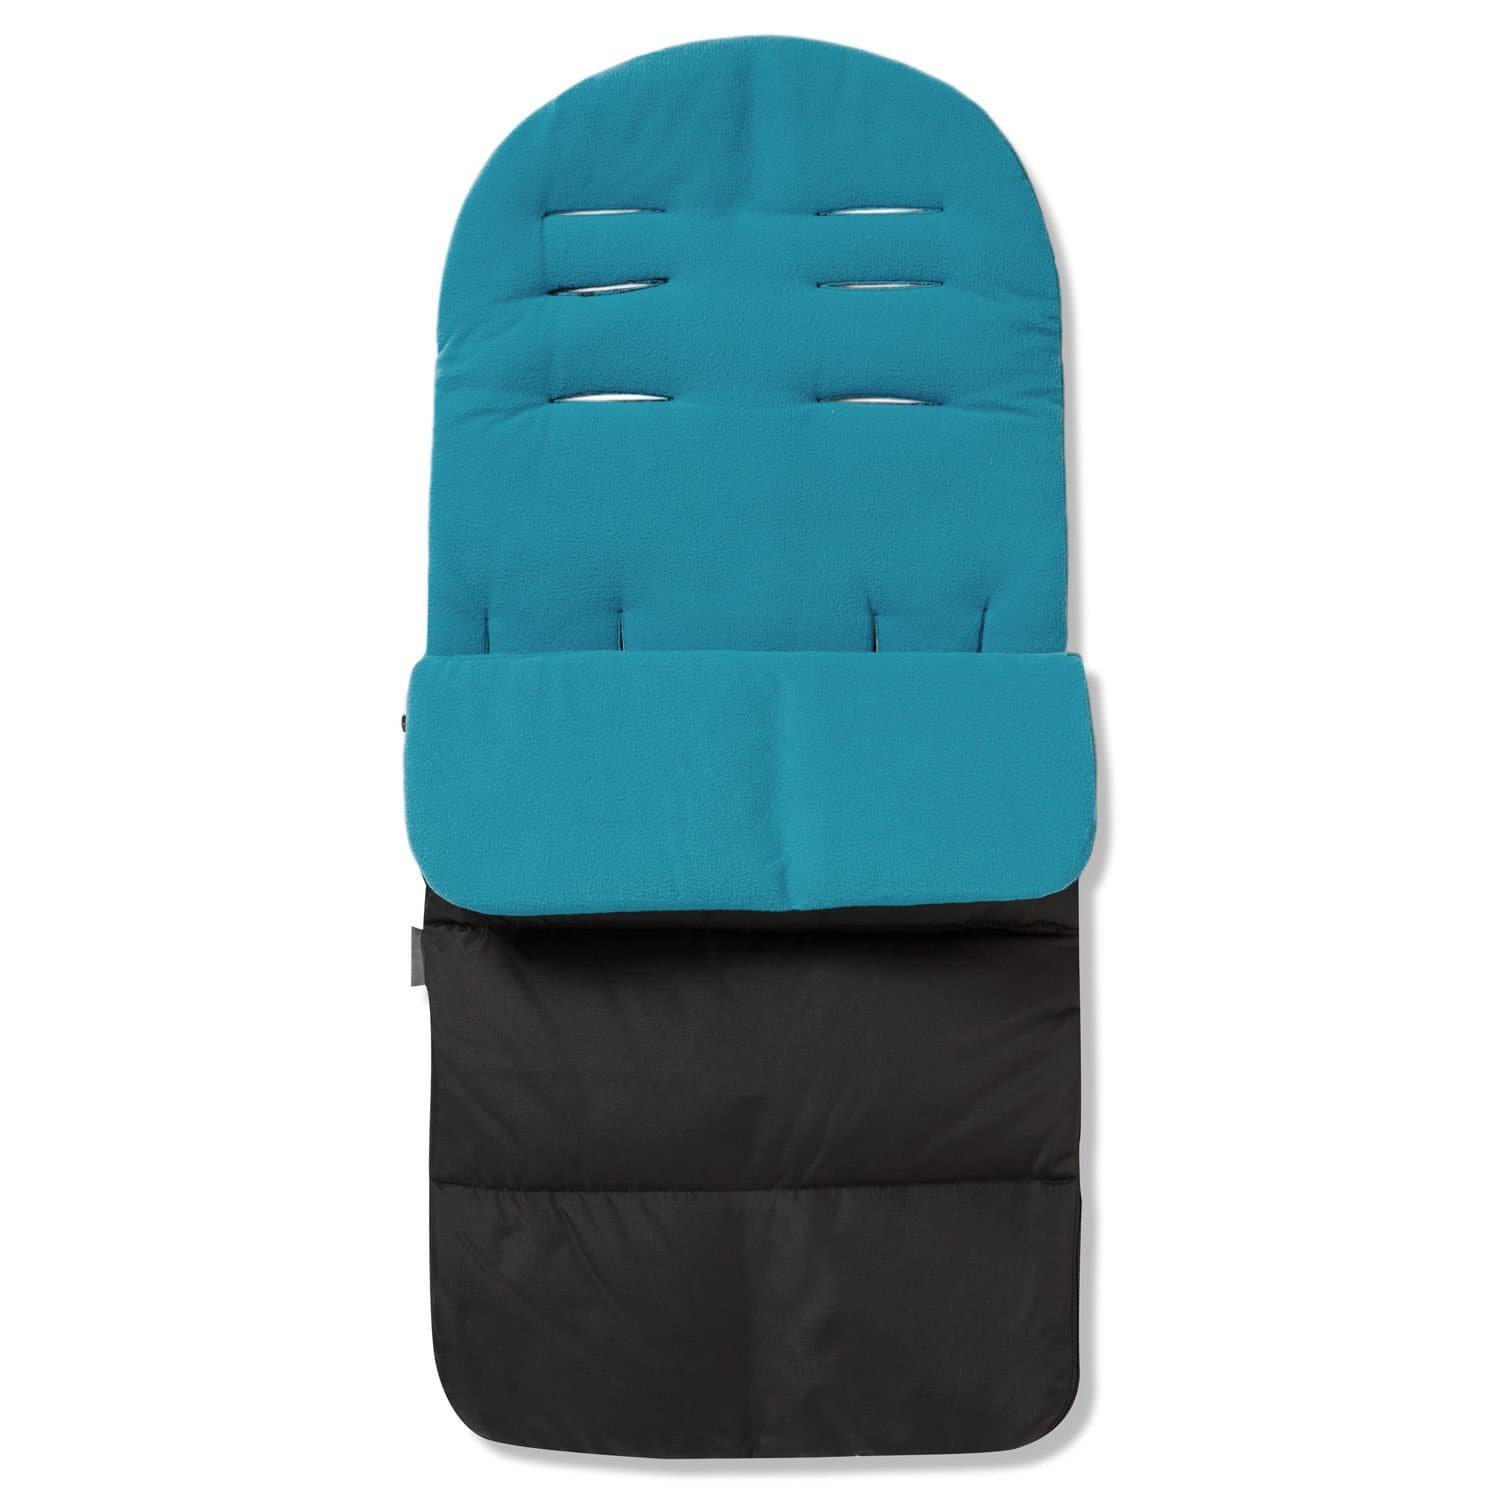 Premium Footmuff / Cosy Toes Compatible with Brio - Ocean Blue / Fits All Models | For Your Little One